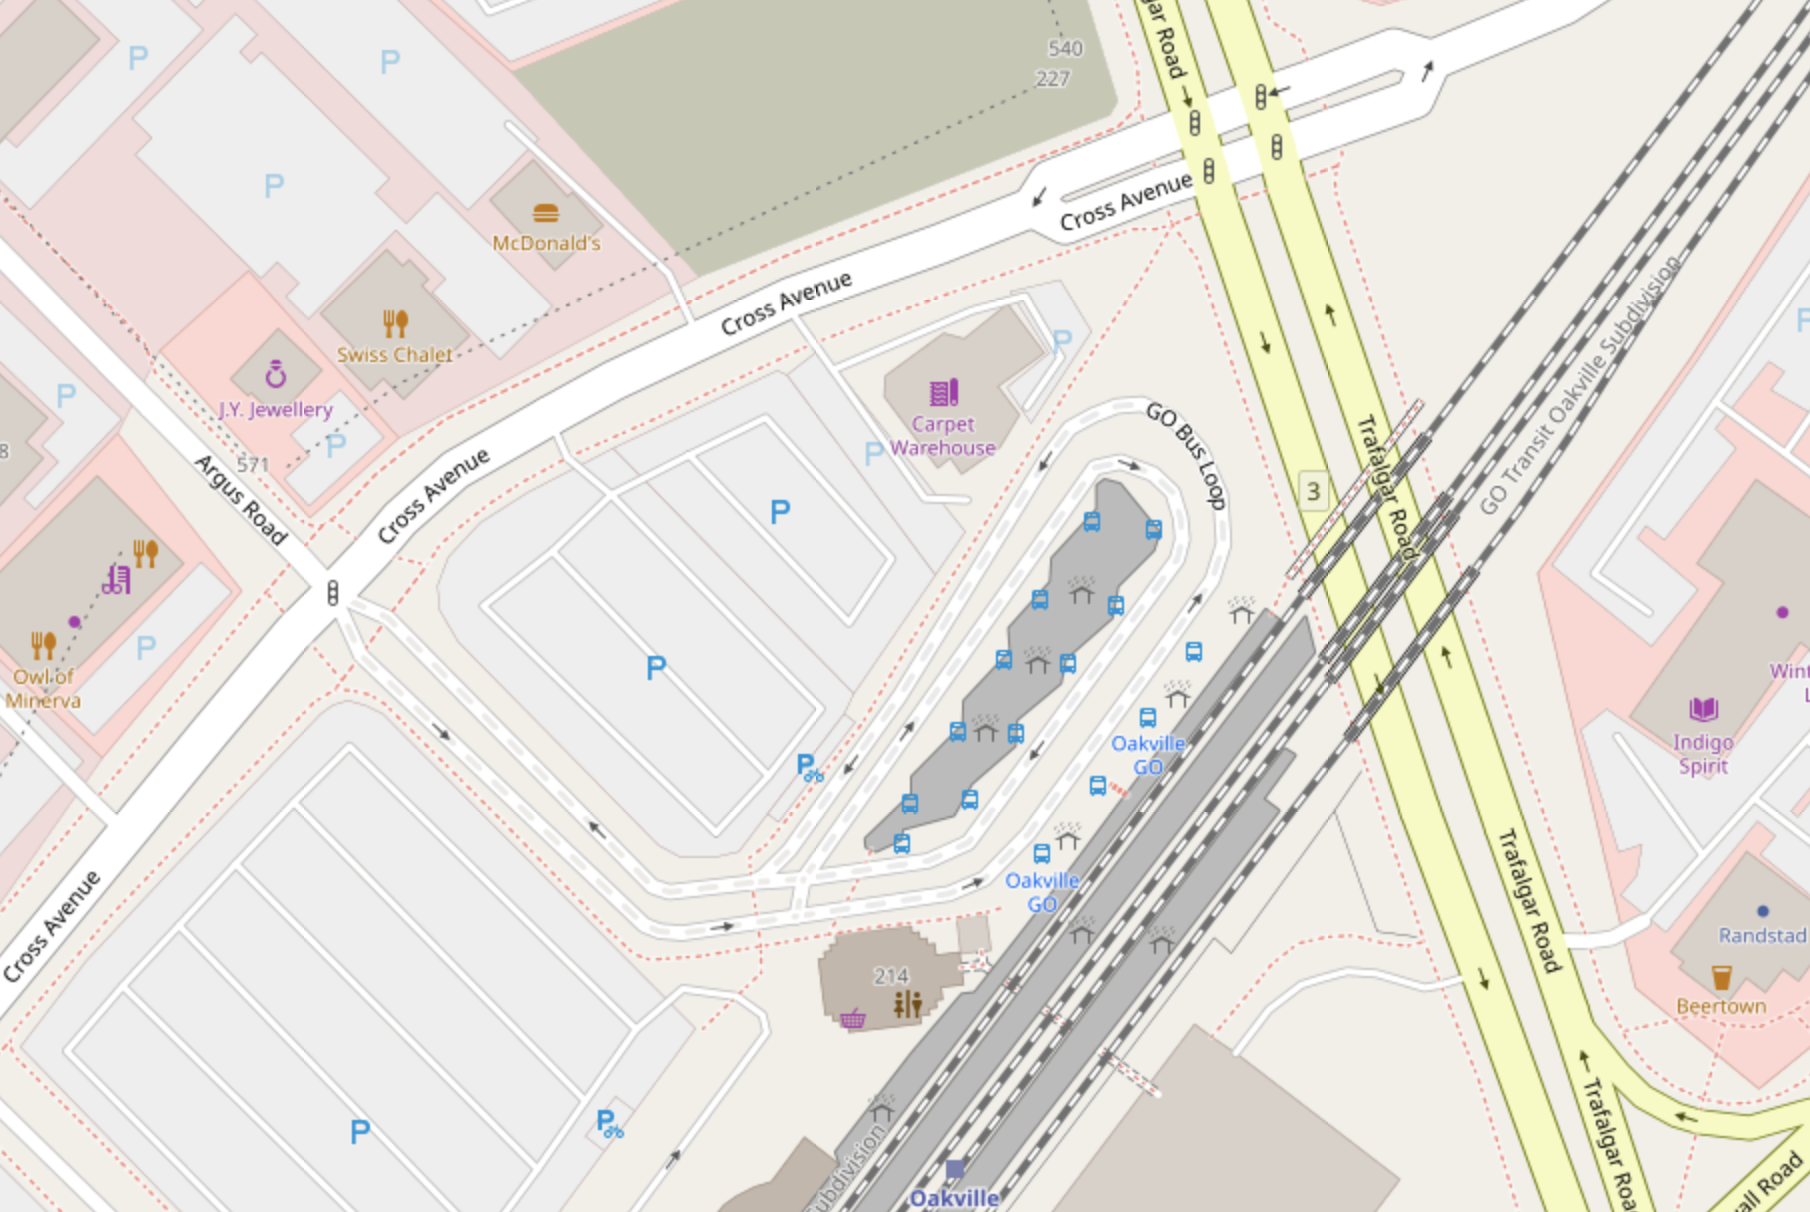 GO Station | Openstreetmap